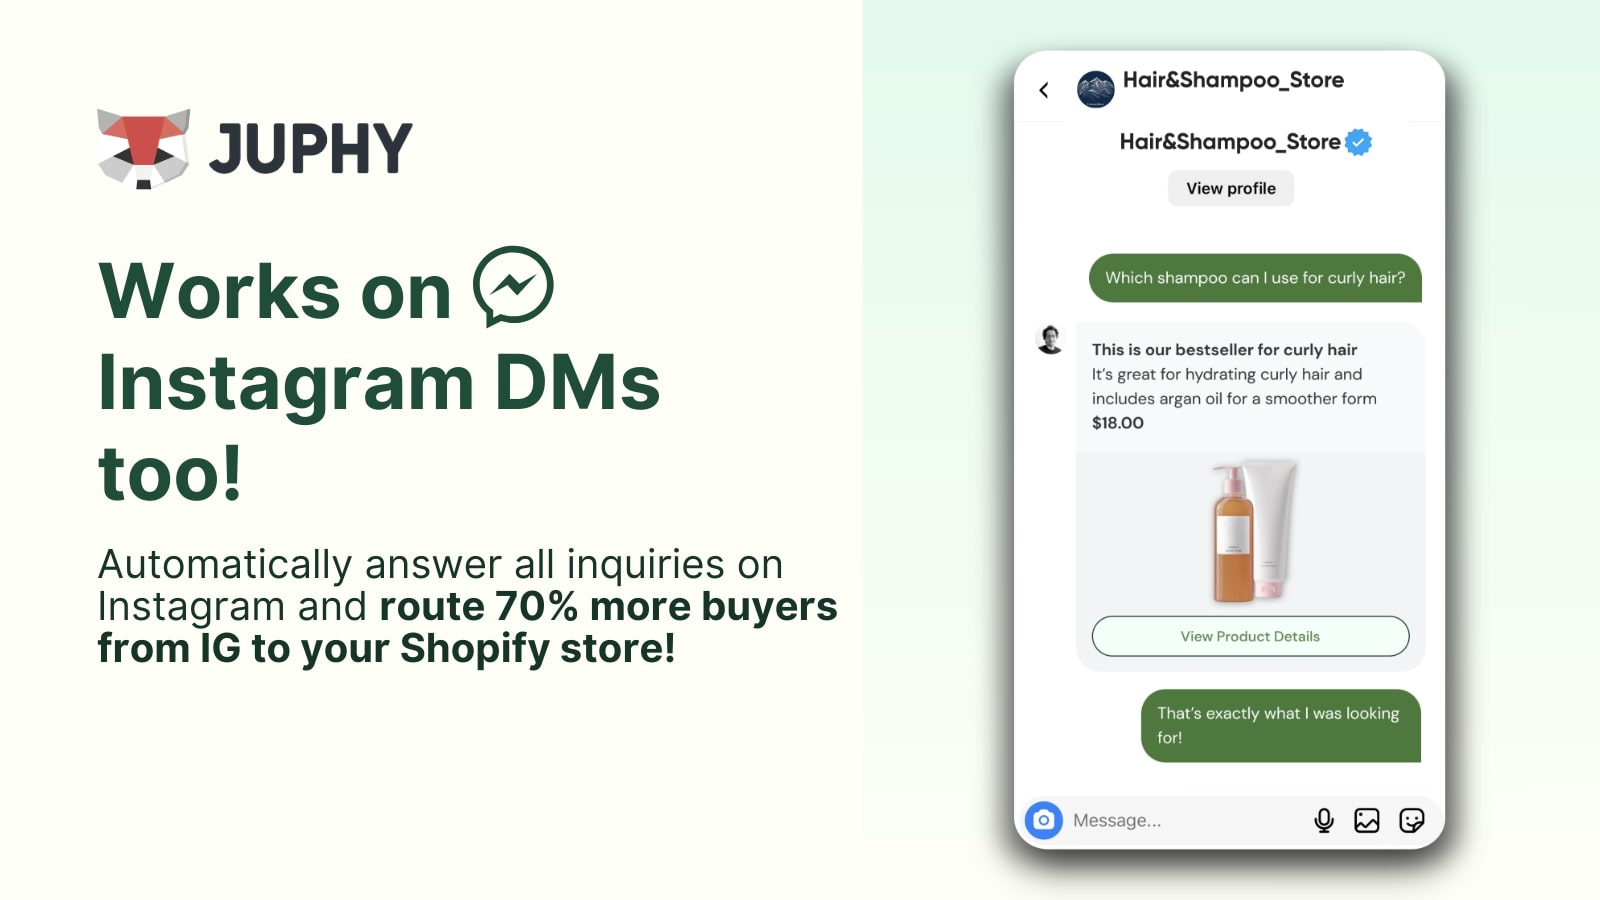 You can streamline product inquiries in your DMs while guiding potential customers to your Shopify store.